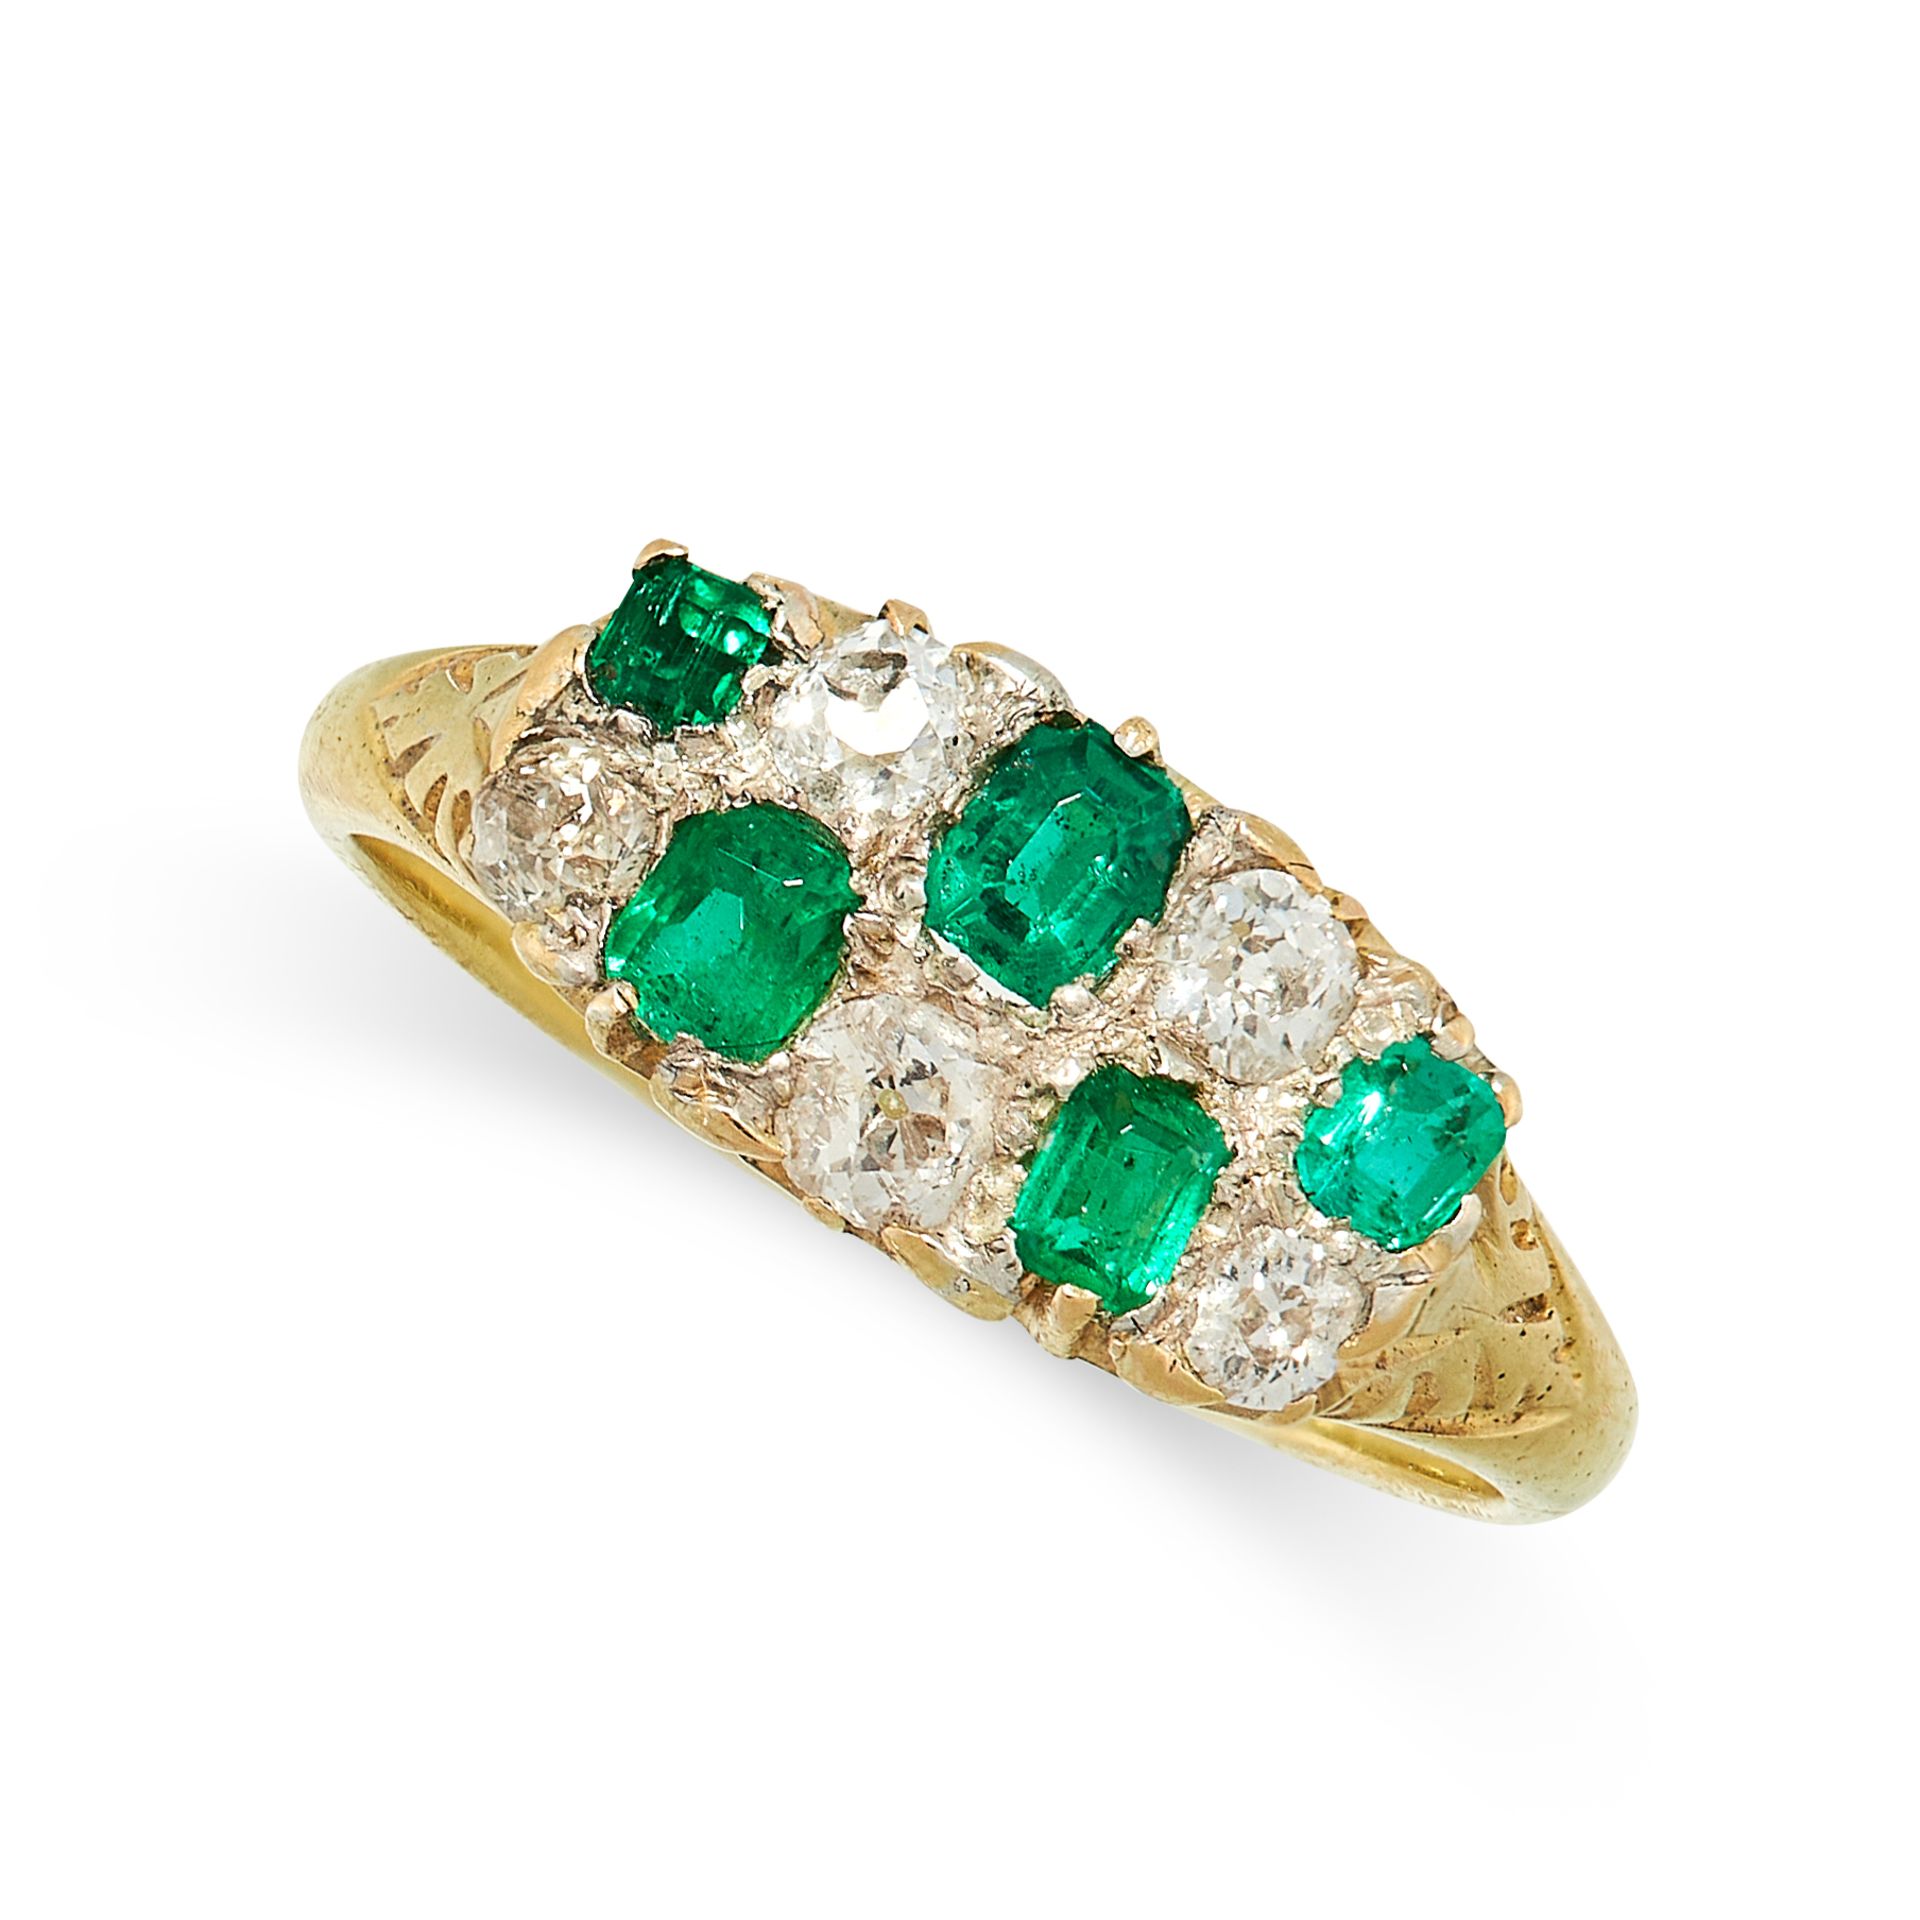 ANTIQUE EMERALD AND DIAMOND RING in 18ct yellow gold, the face set alternately with emerald cut